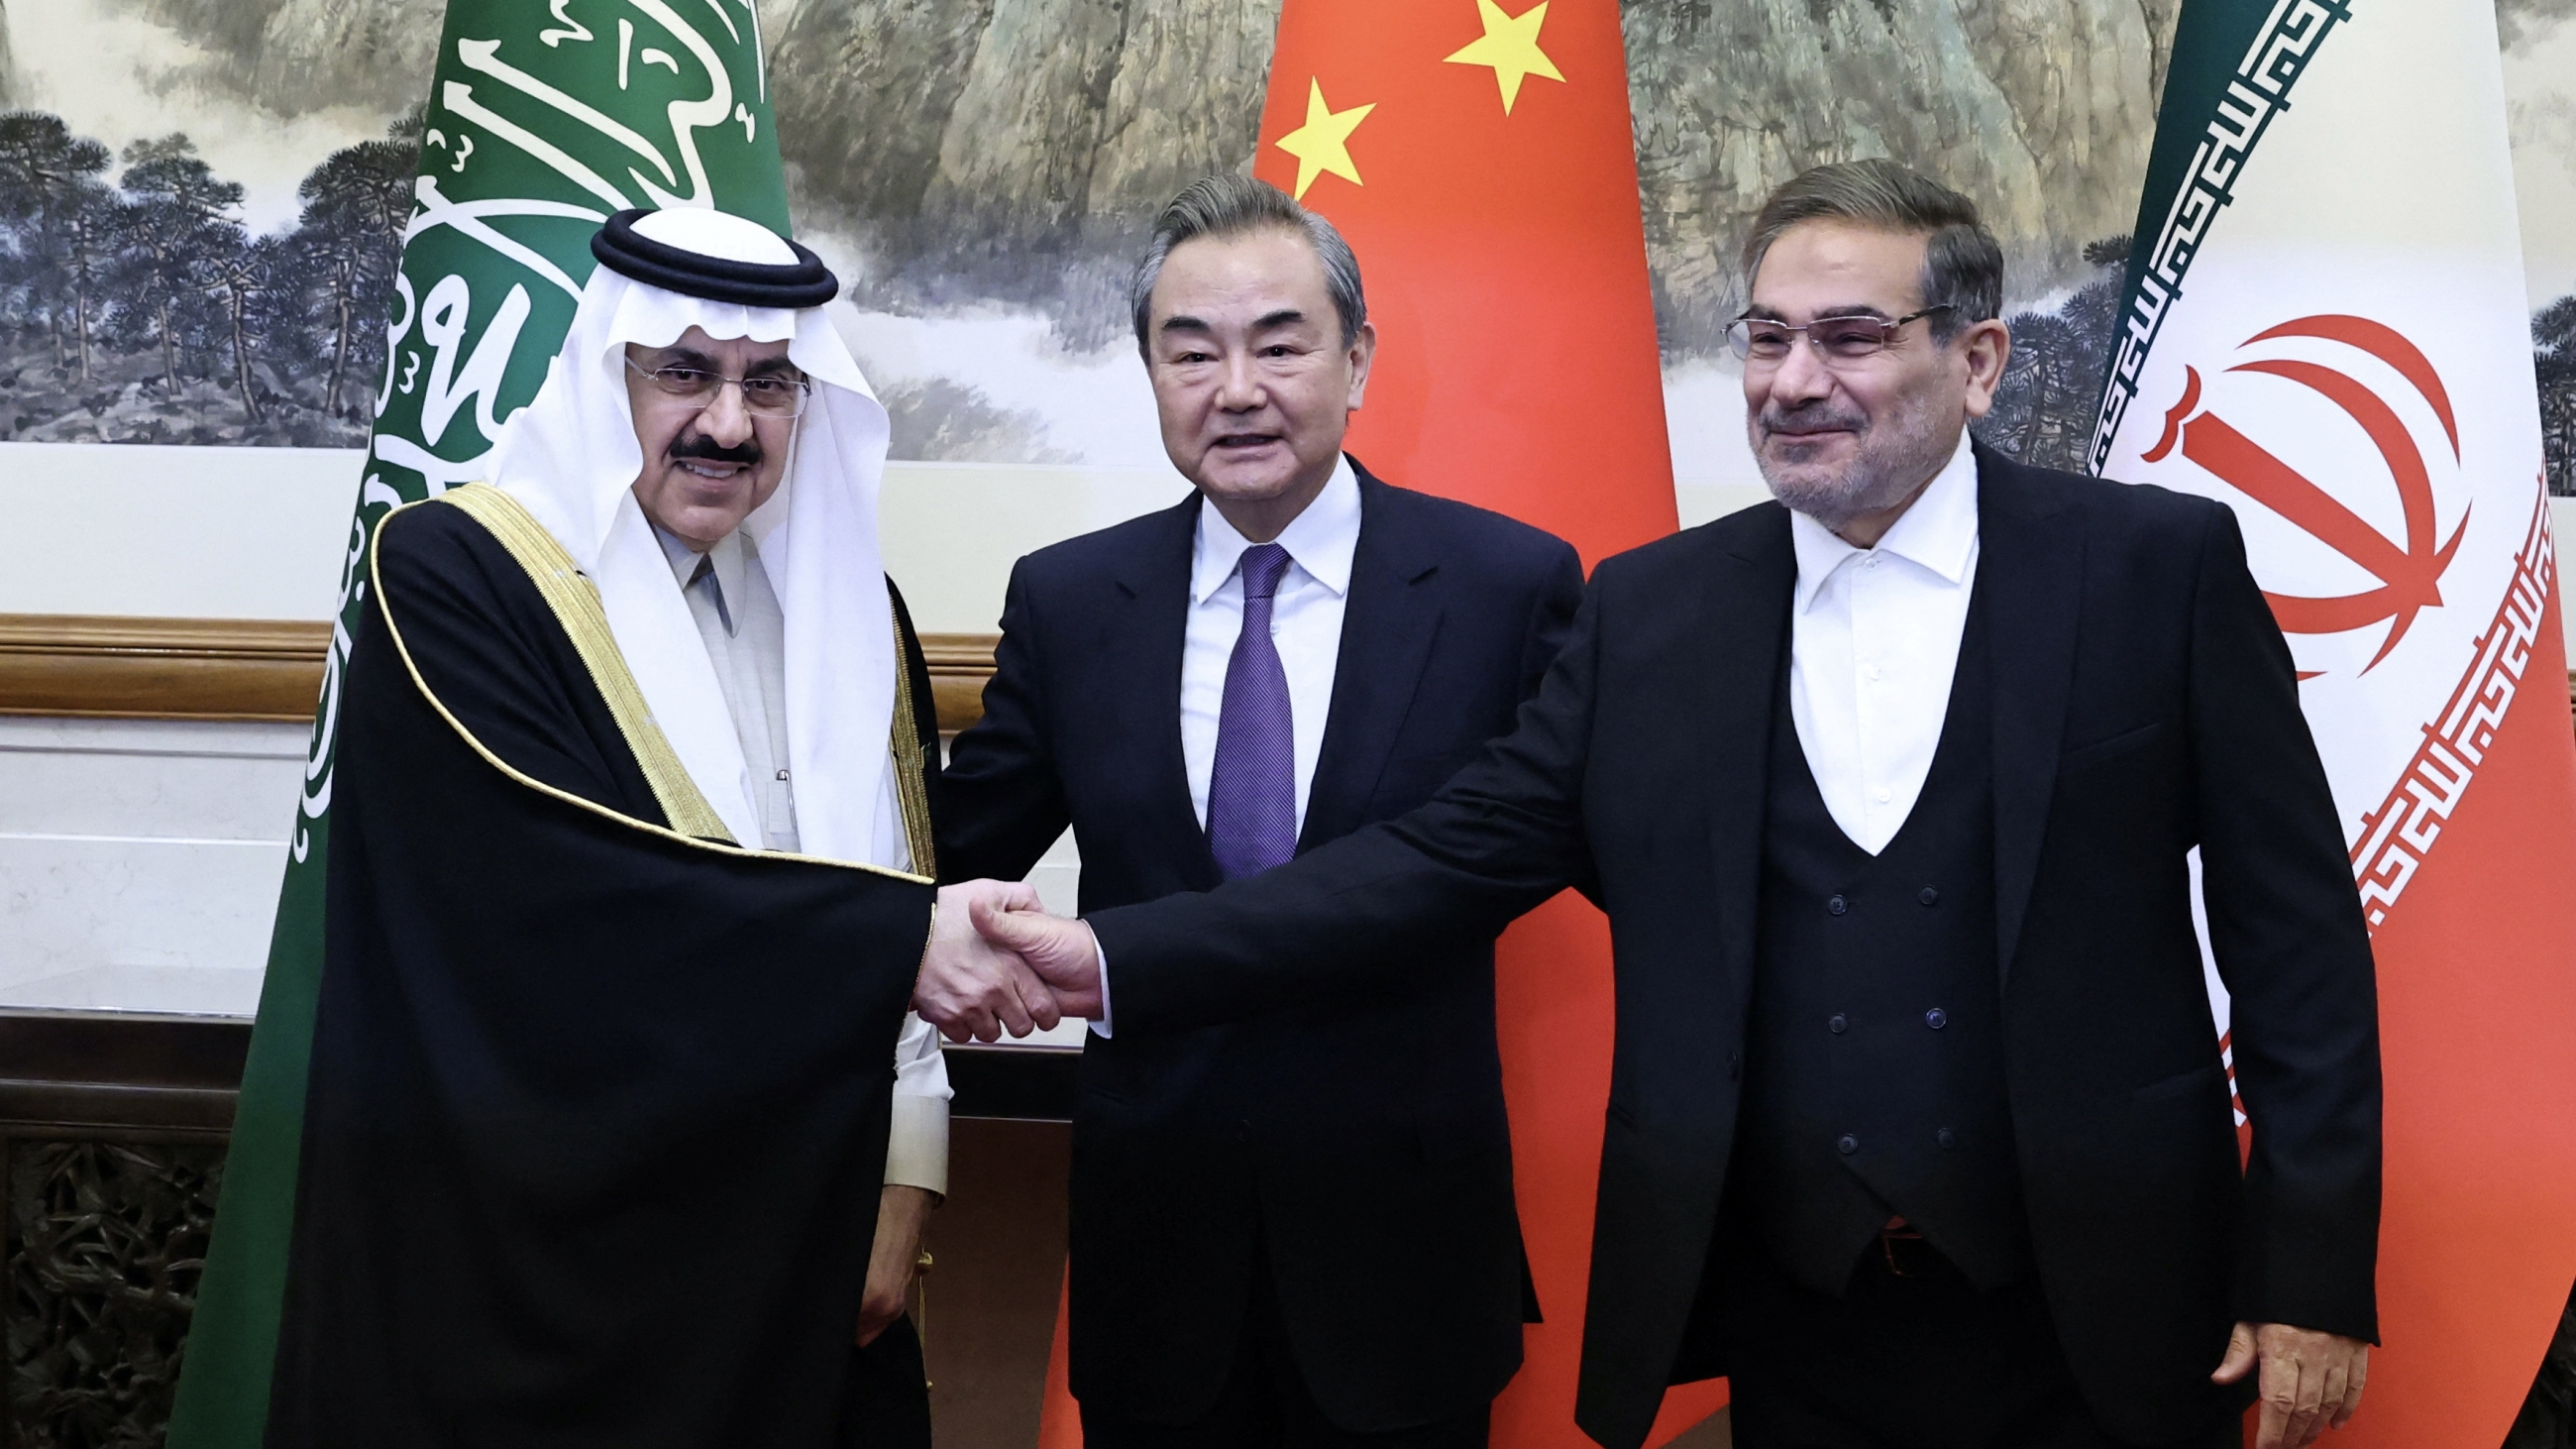 Wang Yi, of the Communist Party of China (C), Ali Shamkhani, of Iran’s Supreme National Security Council (R), and Saudi Arabia's national security adviser Musaad bin Mohammed al Aiban (L) during a meeting in Beijing, China, 10 March 2023 (Reuters)